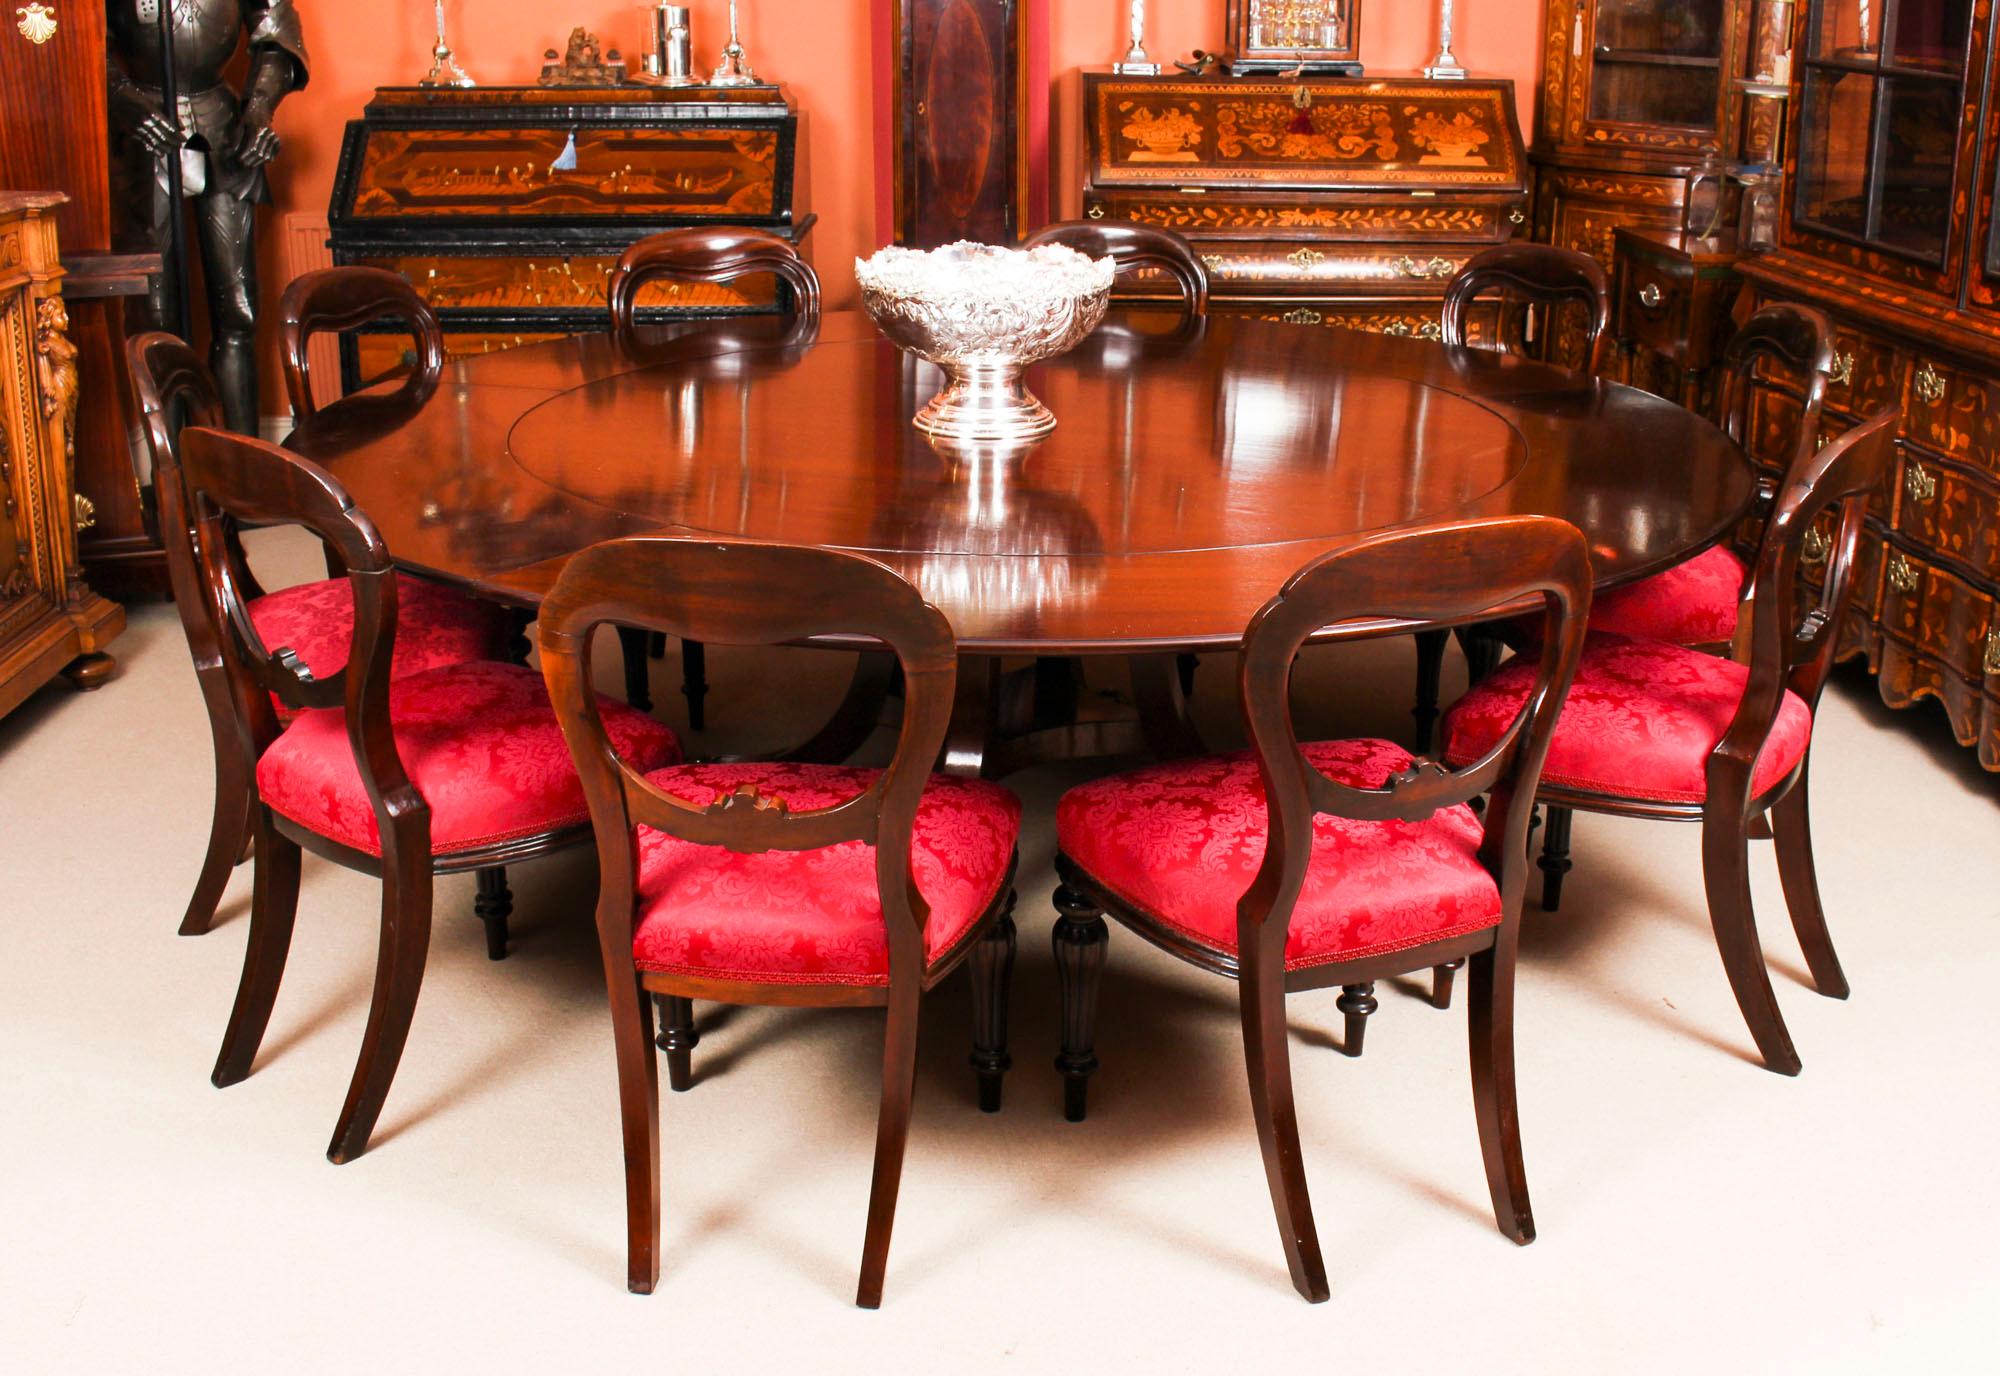 This fantastic dining set comprises a Regency Revival Jupe style flame mahogany dining table by William Tillman, circa 1970 in date and a set of ten antique Victorian balloon back dining chairs, circa 1850 in date.

The beautiful Regency Revival